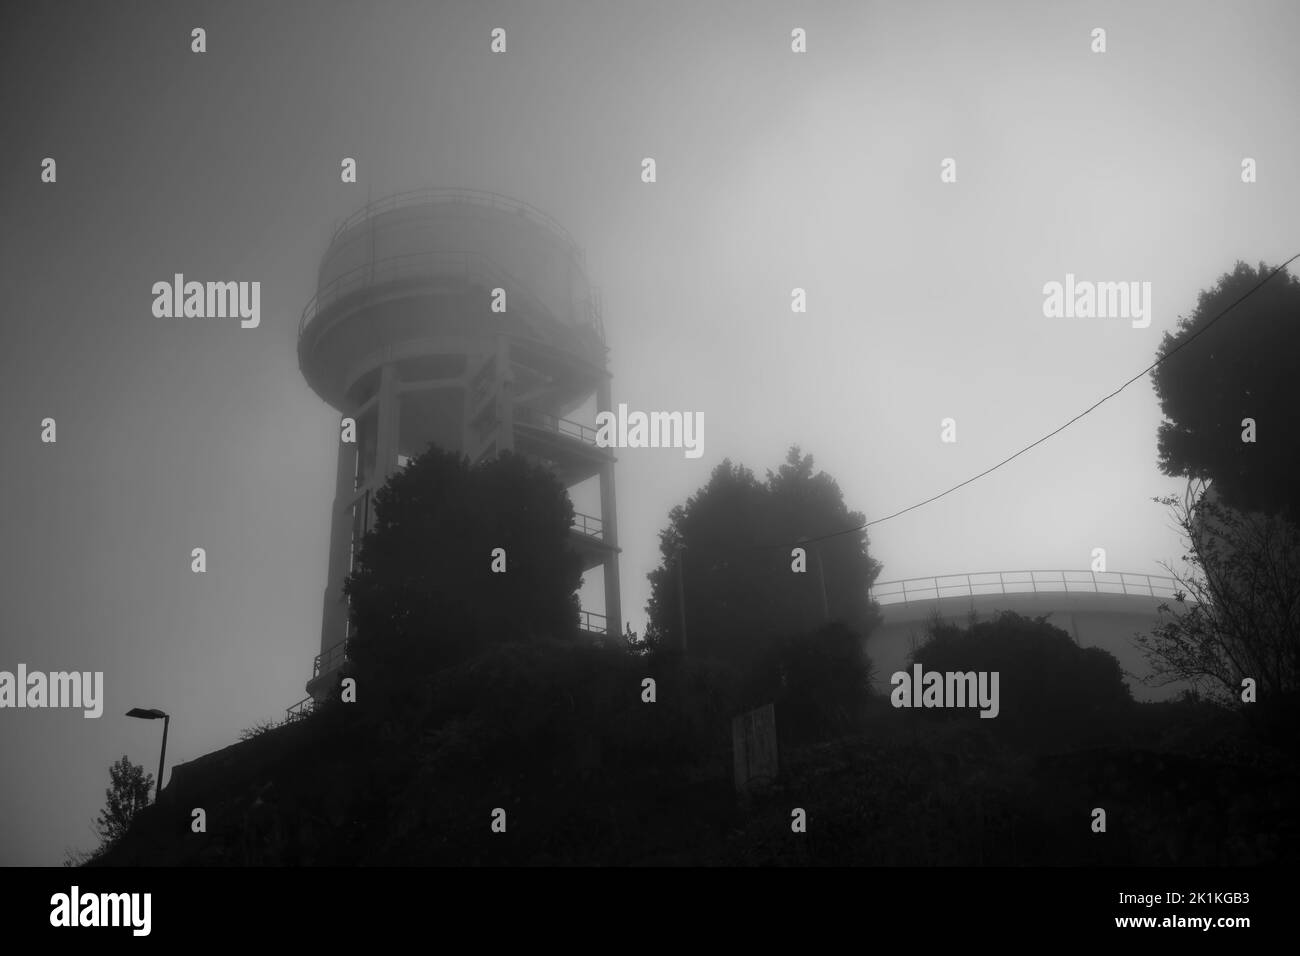 View of the water tower early in the morning in thick fog. Black and white photo. Stock Photo